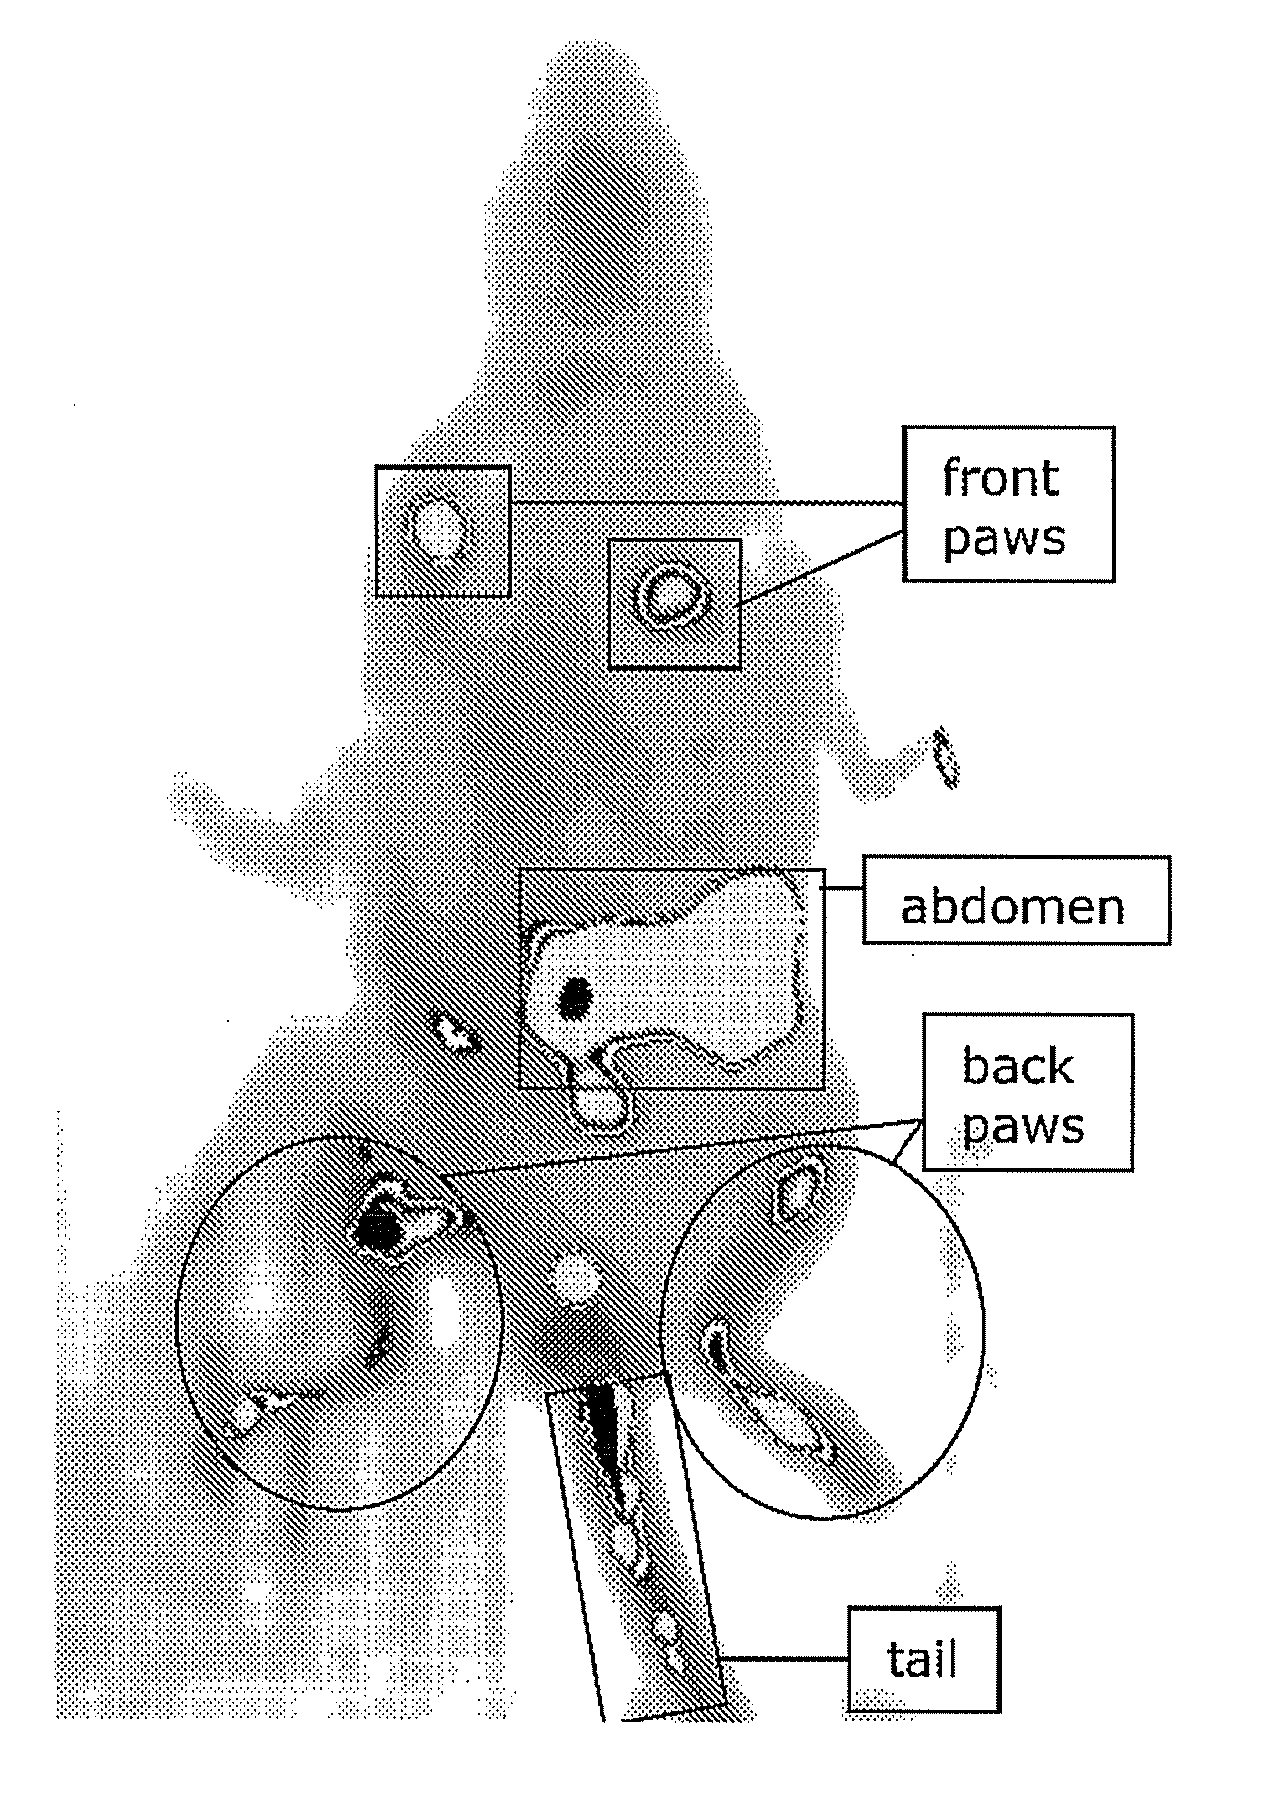 Molecules for targeting compounds to various selected organs or tissues